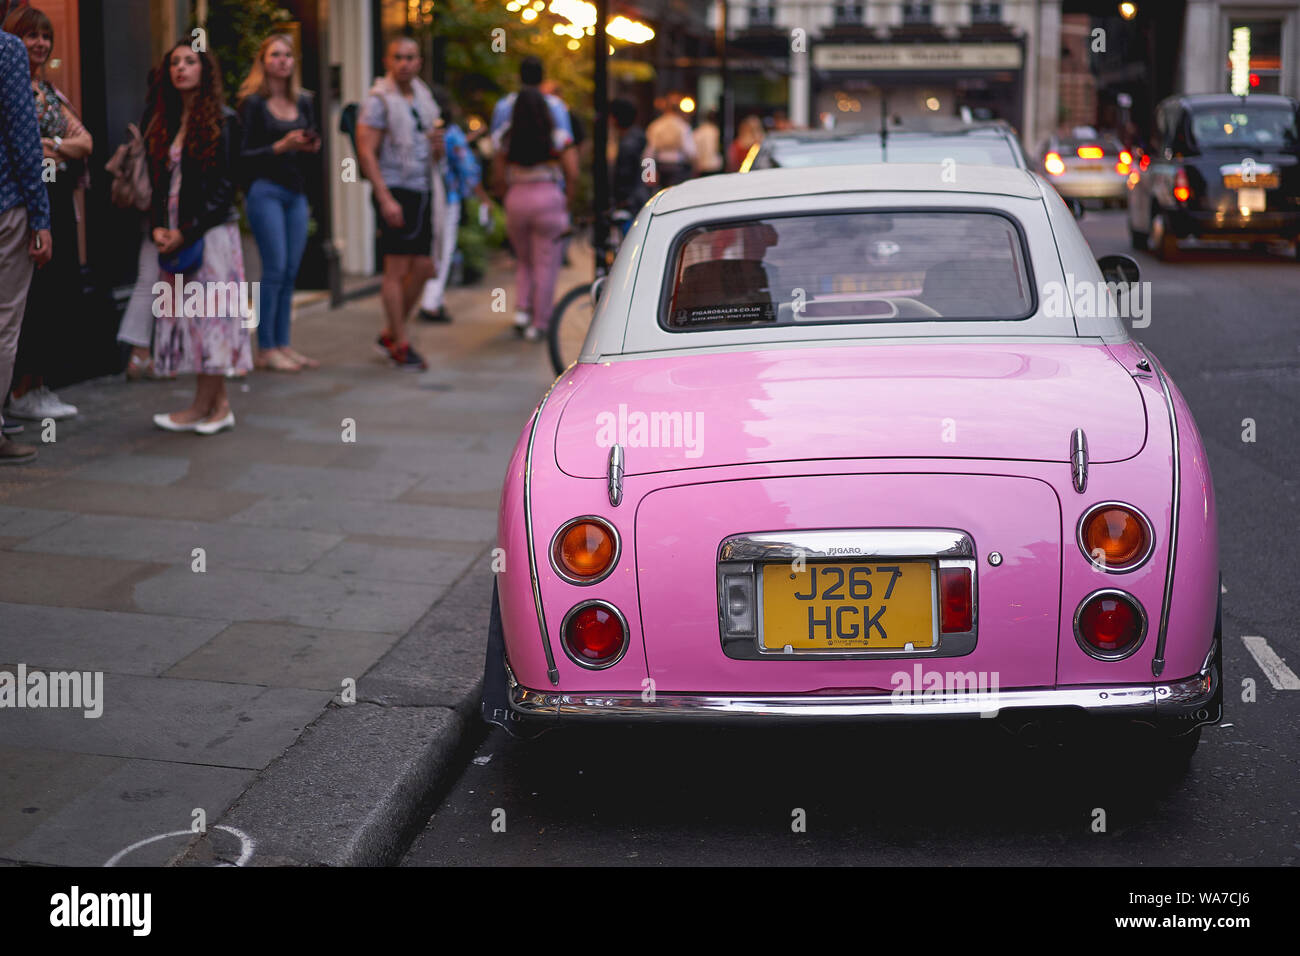 London, UK - August, 2019. A pink retro styled Nissan Figaro parked in a street close to Covent Garden in central London. Stock Photo